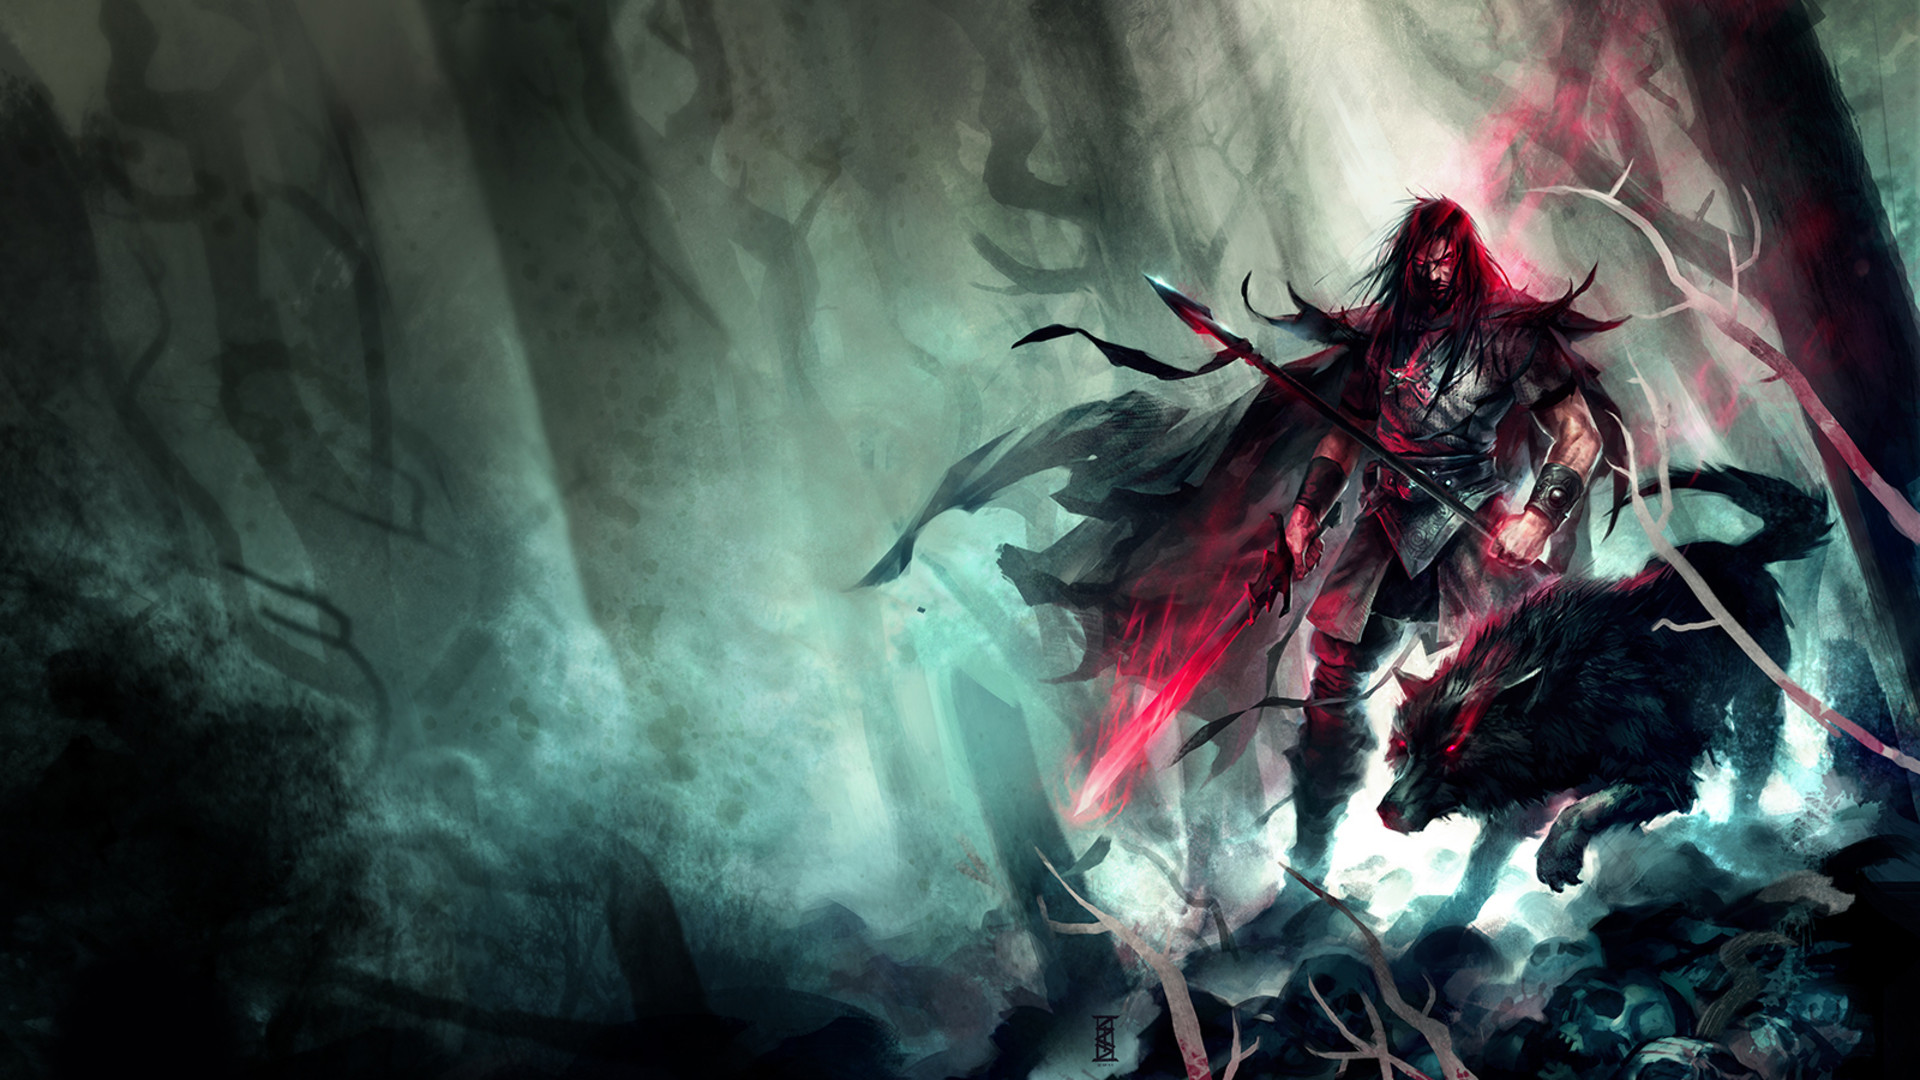 1920x1080 Warrior HD Wallpaper | Background Image |  | ID:182624 - Wallpaper  Abyss